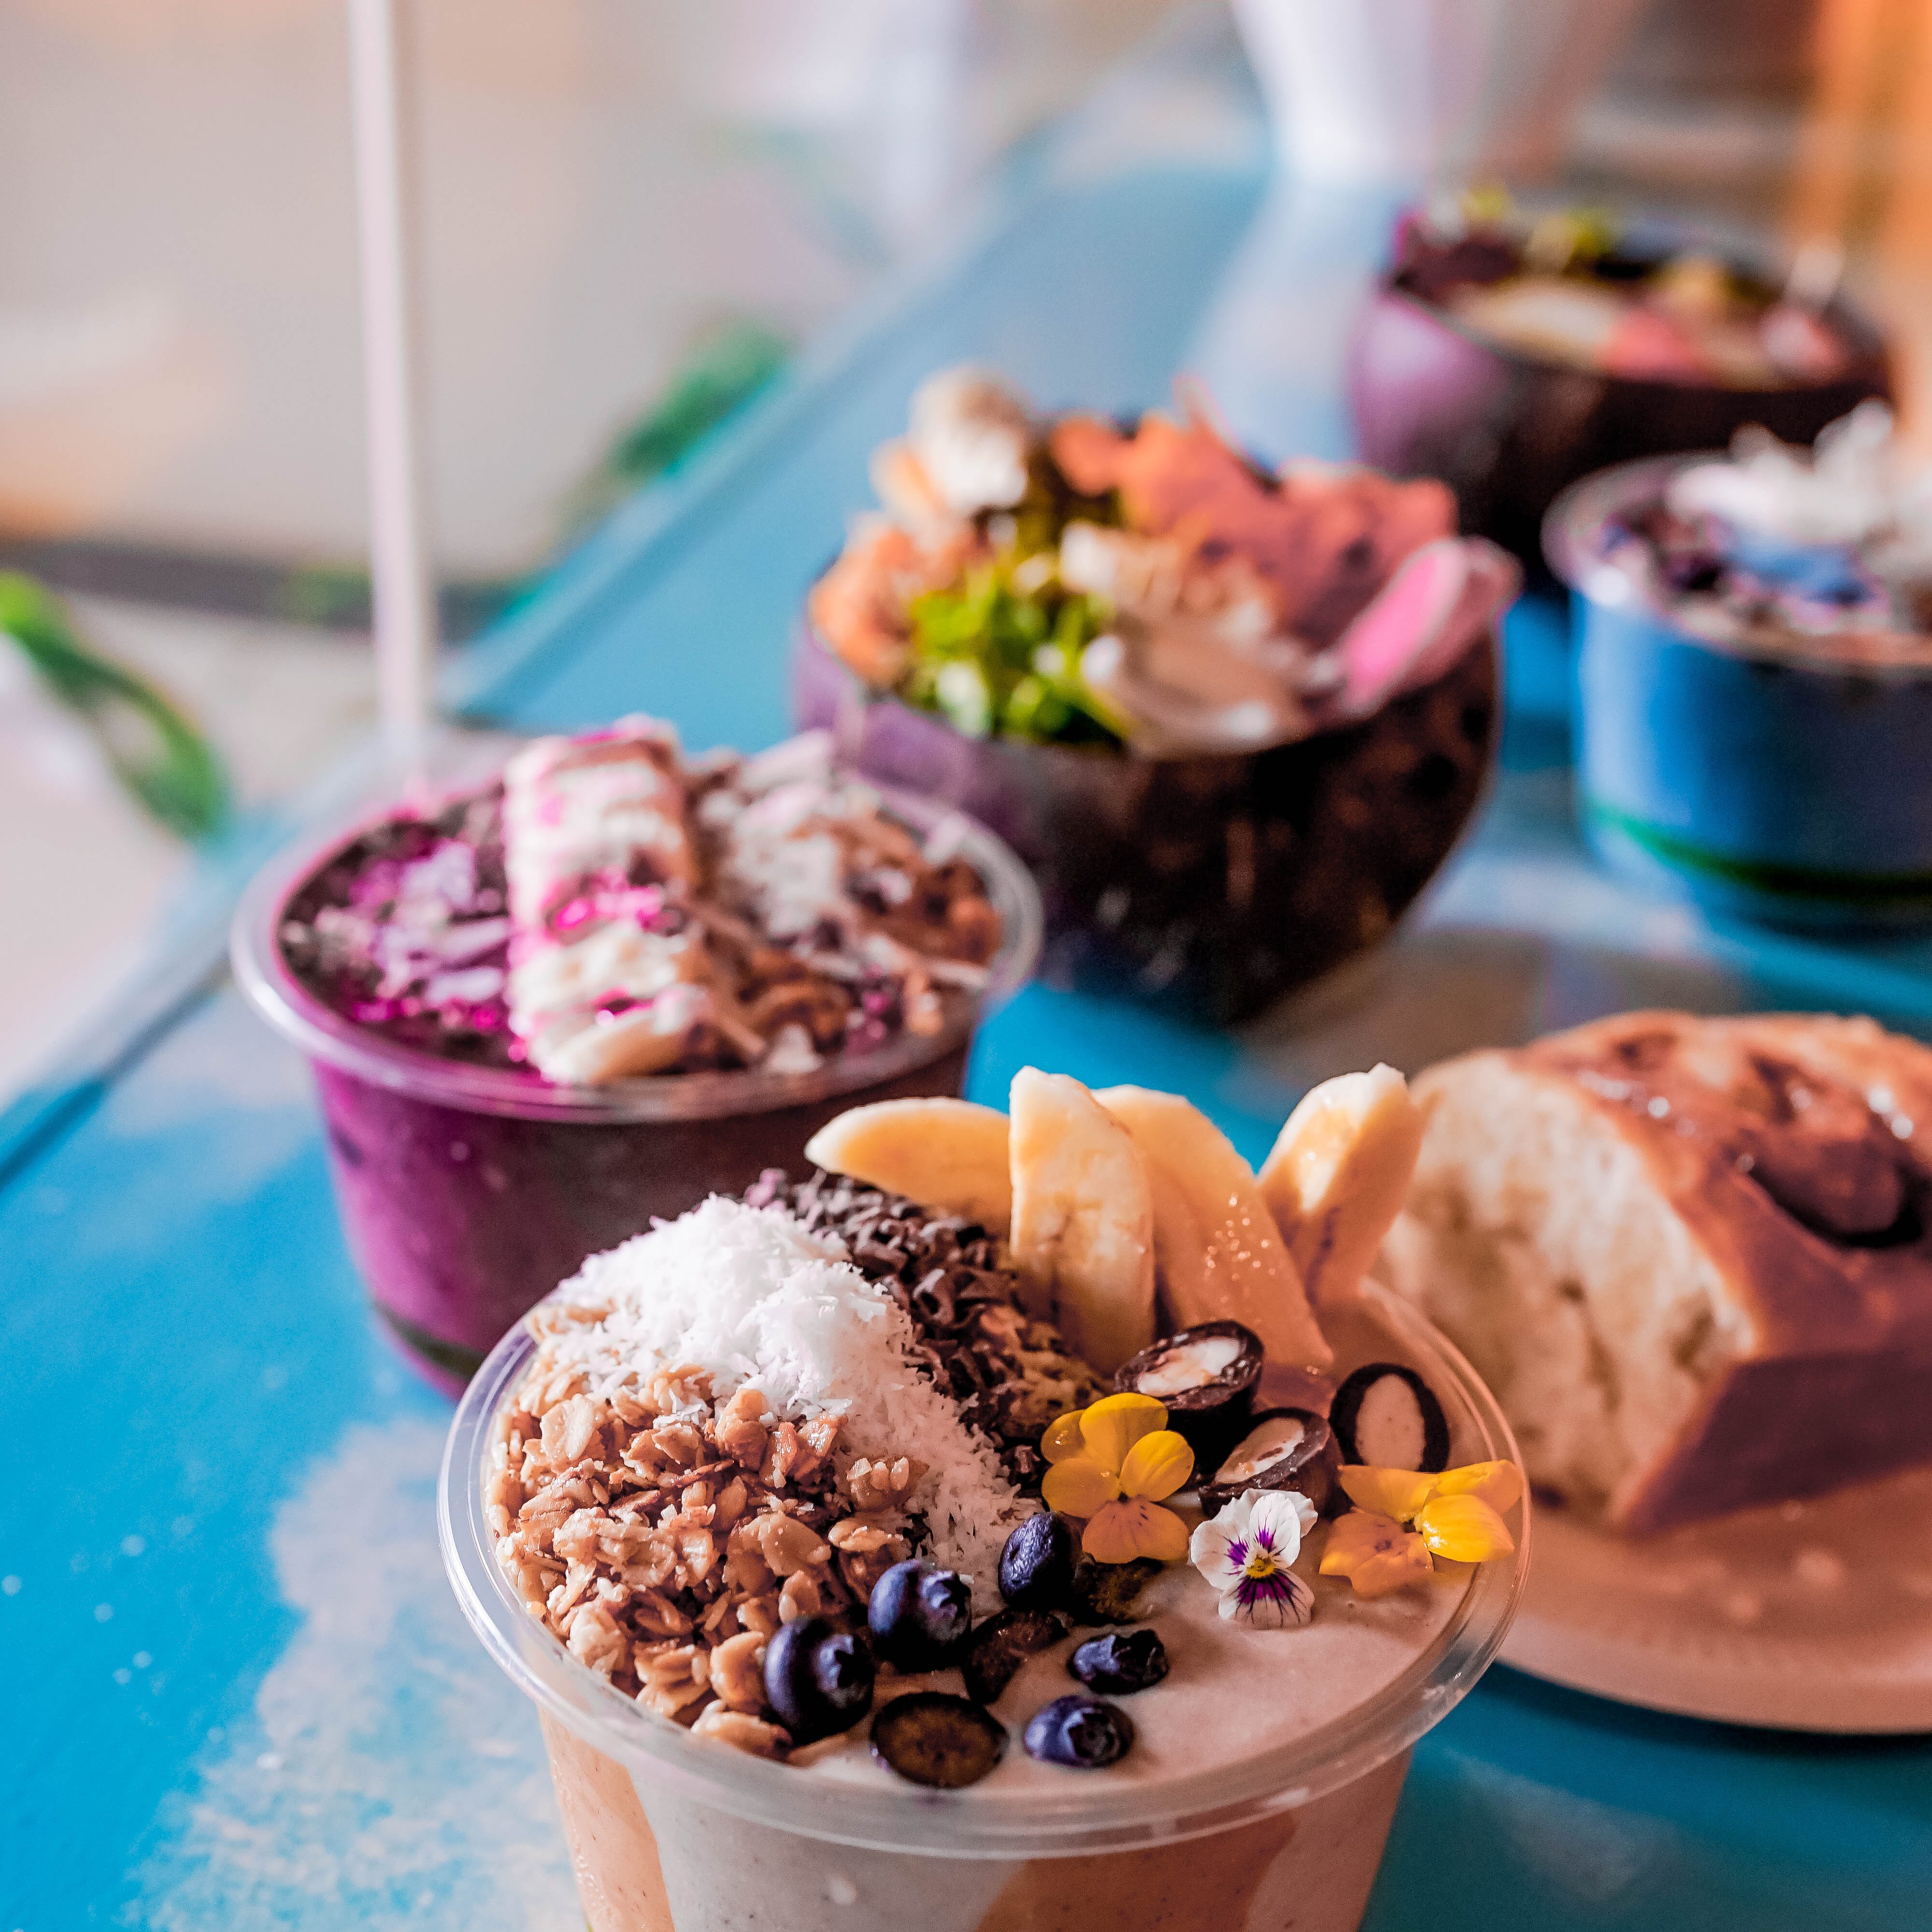 The smoothie bowls at the Sunrise Shack use as much local produce as possible.